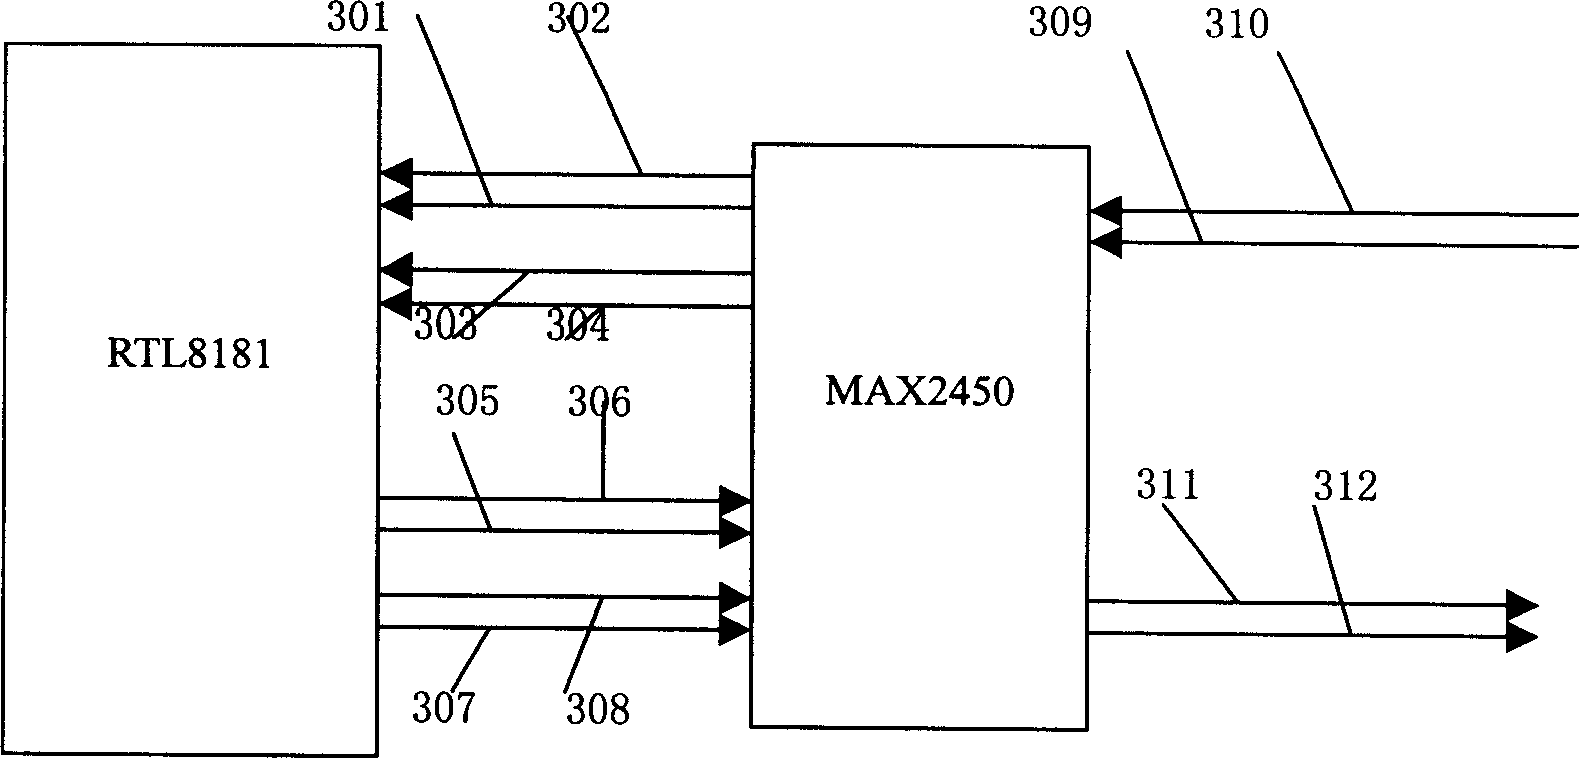 Integrated implementation device of television, network transmission